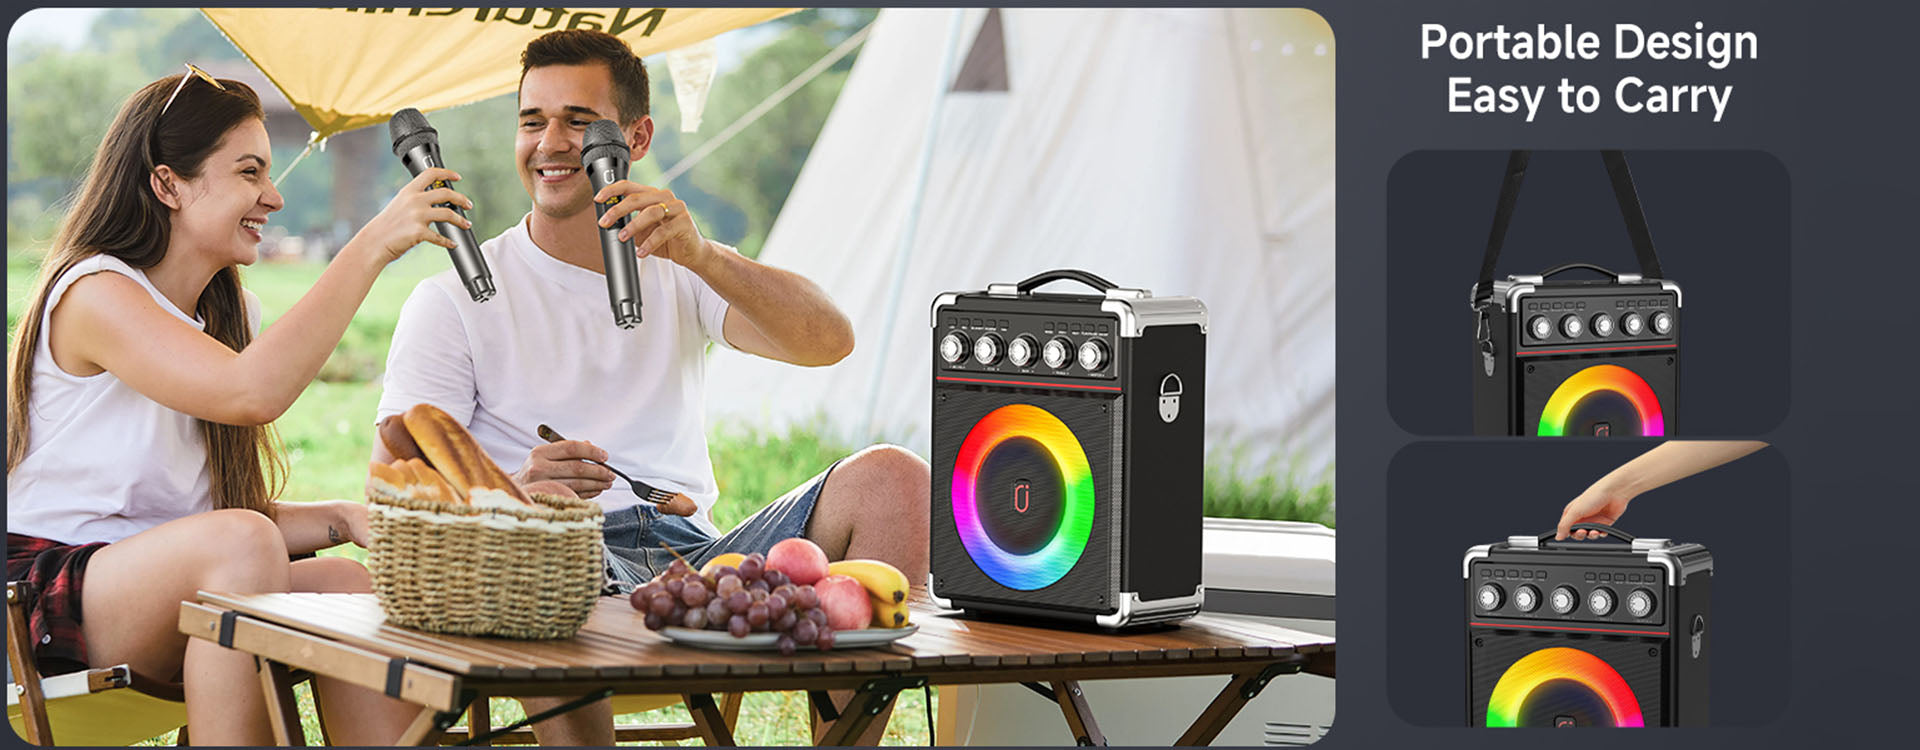  Karaoke speaker for adults with 2 wireless microphones, perfect for outdoor parties and travel.